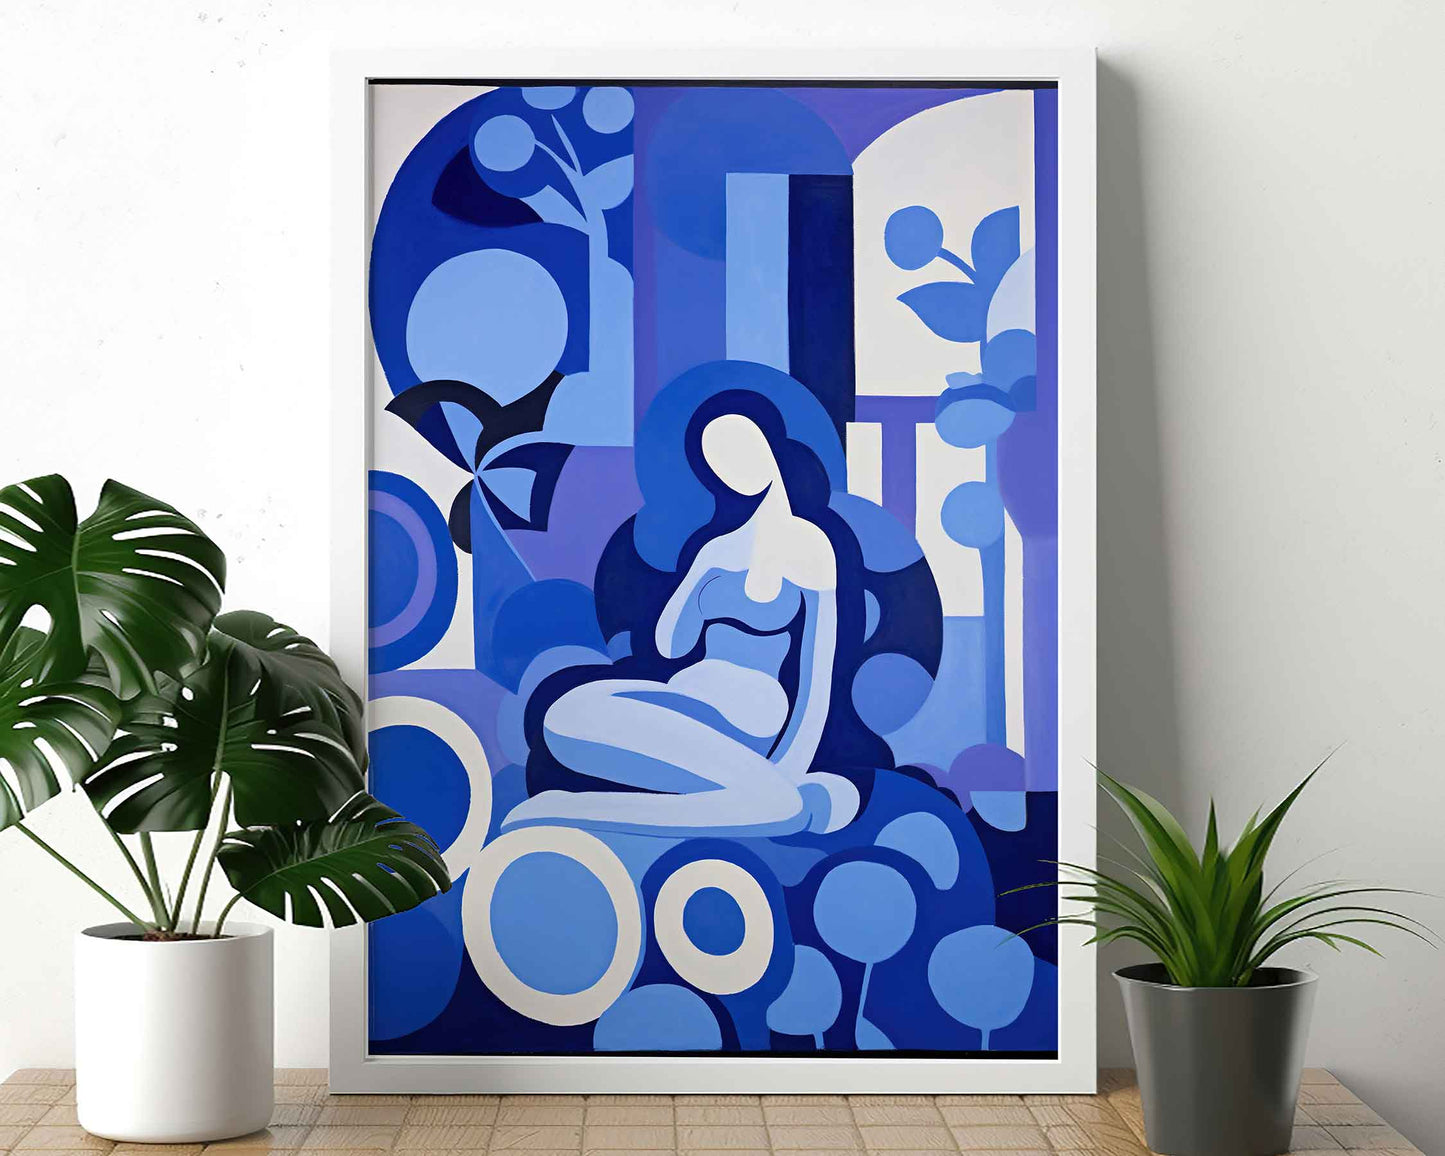 Framed Image of Matisse Style Wall Art Print Blue Themed Poster Oil Paintings